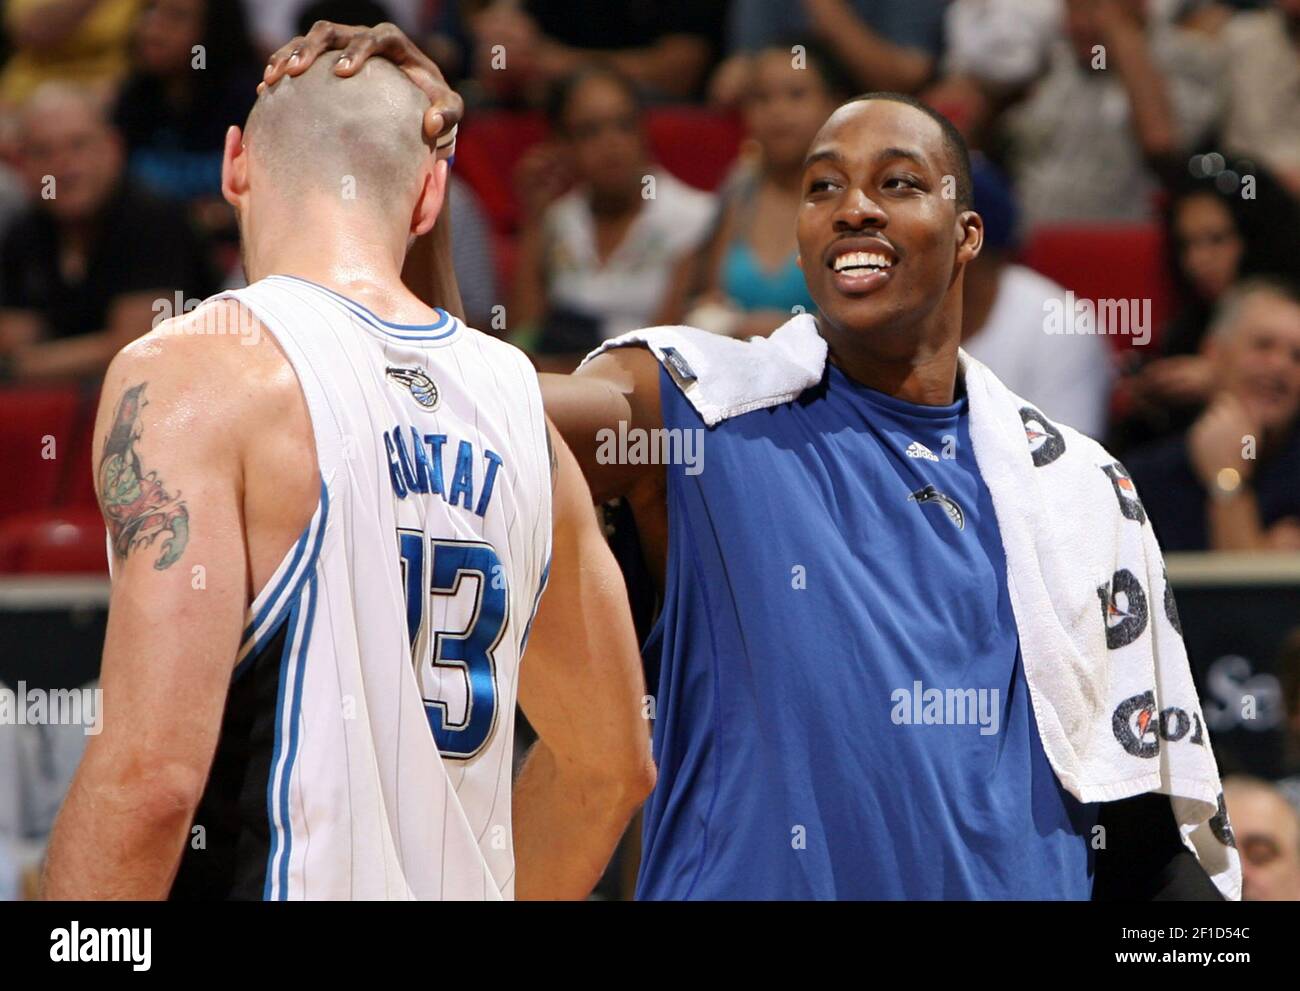 Orlando Magic center Dwight Howard, left, gives a congratulatory pat on the head to his replacement, center Marcin Gortat, after Gortat scored in the first half against the Chicago Bulls at Amway Arena in Orlando, Florida, Wednesday, March 11, 2009. The Magic defeated the Bulls, 107-79. (Photo by Stephen M. Dowell/Orlando Sentinel/MCT/Sipa USA) Stock Photo